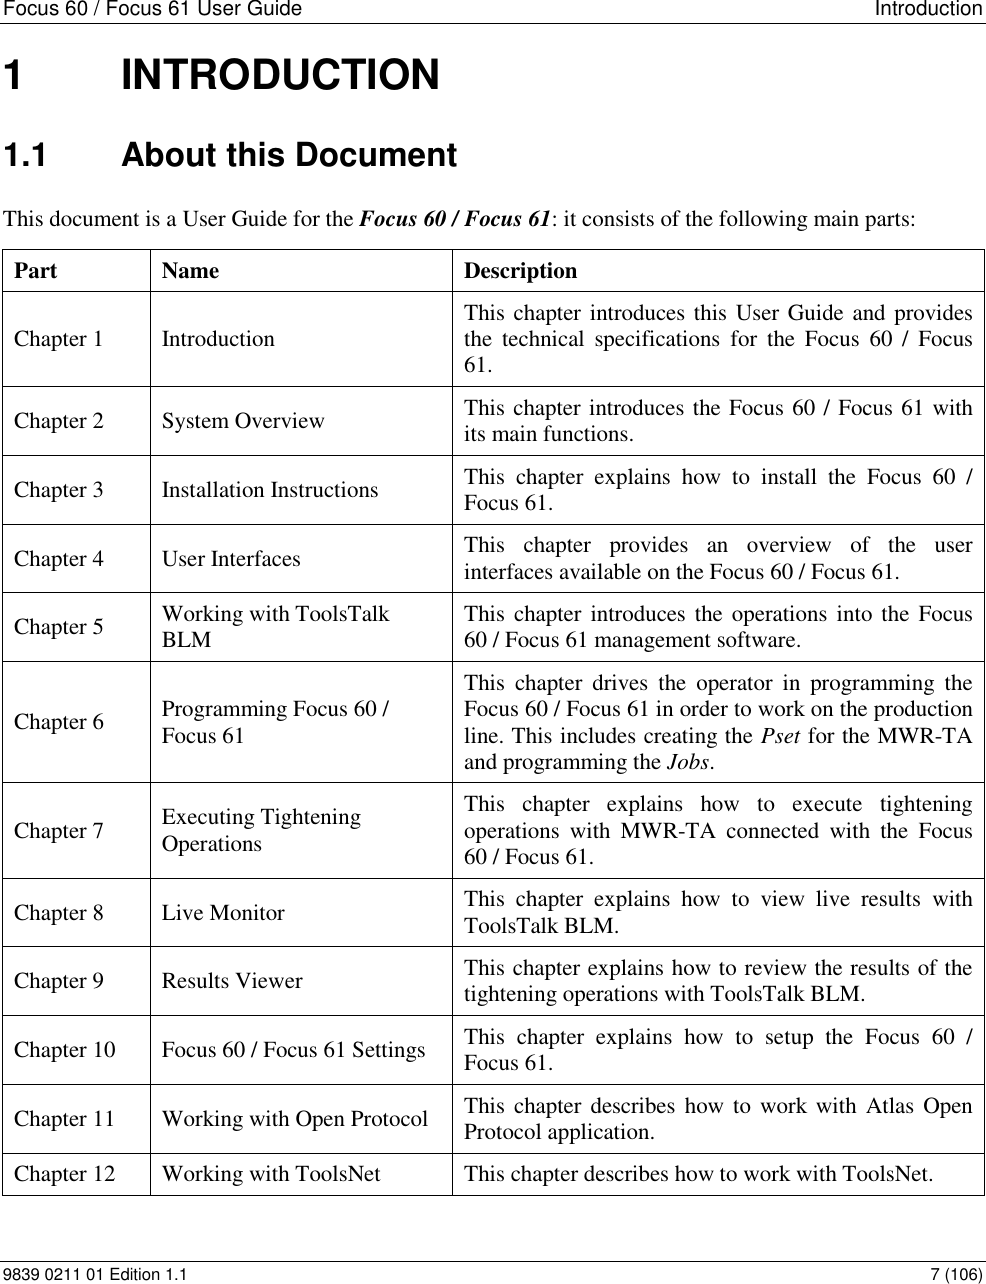 Focus 60 / Focus 61 User Guide   Introduction 9839 0211 01 Edition 1.1    7 (106) 1  INTRODUCTION 1.1  About this Document This document is a User Guide for the Focus 60 / Focus 61: it consists of the following main parts: Part Name  Description Chapter 1 Introduction  This chapter introduces this User Guide and provides the  technical  specifications  for  the  Focus  60  /  Focus 61. Chapter 2 System Overview This chapter introduces the Focus 60 / Focus 61 with its main functions.  Chapter 3 Installation Instructions This  chapter  explains  how  to  install  the  Focus  60  / Focus 61. Chapter 4 User Interfaces This  chapter  provides  an  overview  of  the  user interfaces available on the Focus 60 / Focus 61. Chapter 5 Working with ToolsTalk BLM This chapter introduces the operations  into the Focus 60 / Focus 61 management software.  Chapter 6 Programming Focus 60 / Focus 61 This  chapter  drives  the  operator  in  programming  the Focus 60 / Focus 61 in order to work on the production line. This includes creating the Pset for the MWR-TA and programming the Jobs. Chapter 7 Executing Tightening Operations This  chapter  explains  how  to  execute  tightening operations  with  MWR-TA  connected  with  the  Focus 60 / Focus 61. Chapter 8 Live Monitor This  chapter  explains  how  to  view  live  results  with ToolsTalk BLM. Chapter 9 Results Viewer This chapter explains how to review the results of the tightening operations with ToolsTalk BLM. Chapter 10 Focus 60 / Focus 61 Settings This  chapter  explains  how  to  setup  the  Focus  60  / Focus 61. Chapter 11 Working with Open Protocol  This chapter describes how to work with  Atlas Open Protocol application. Chapter 12 Working with ToolsNet This chapter describes how to work with ToolsNet. 